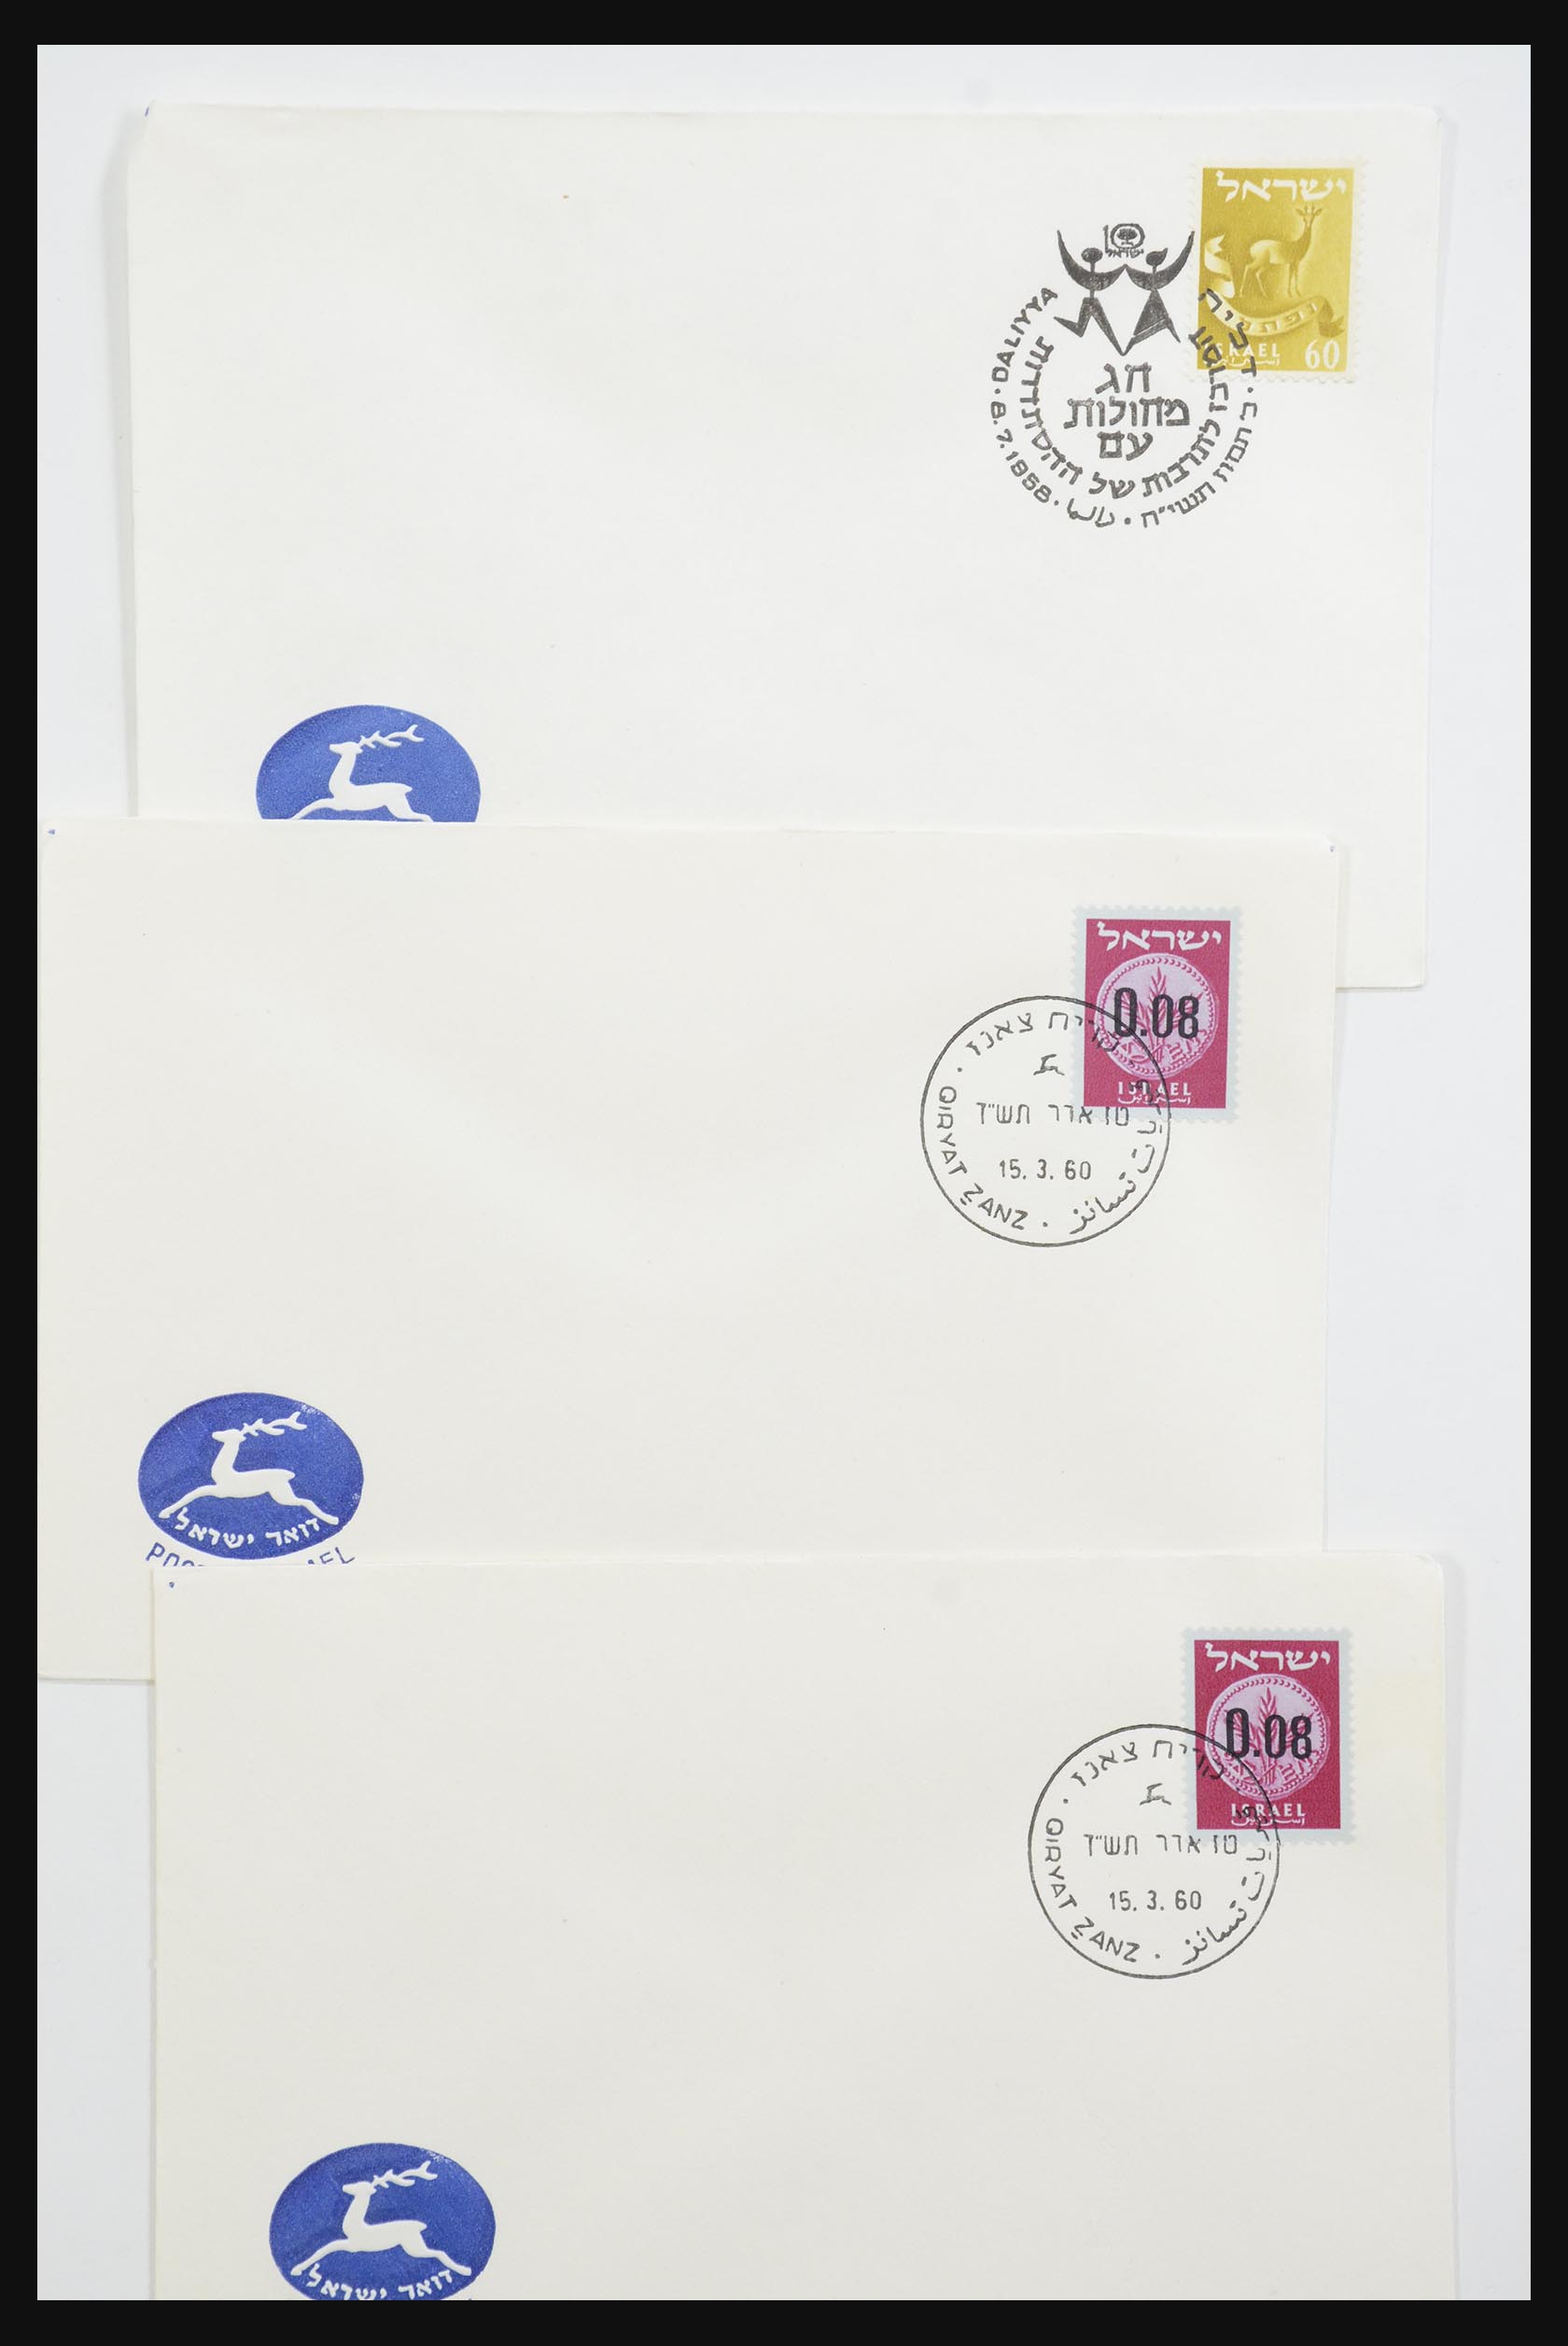 31924 078 - 31924 Israel first day cover collection 1957-2003.